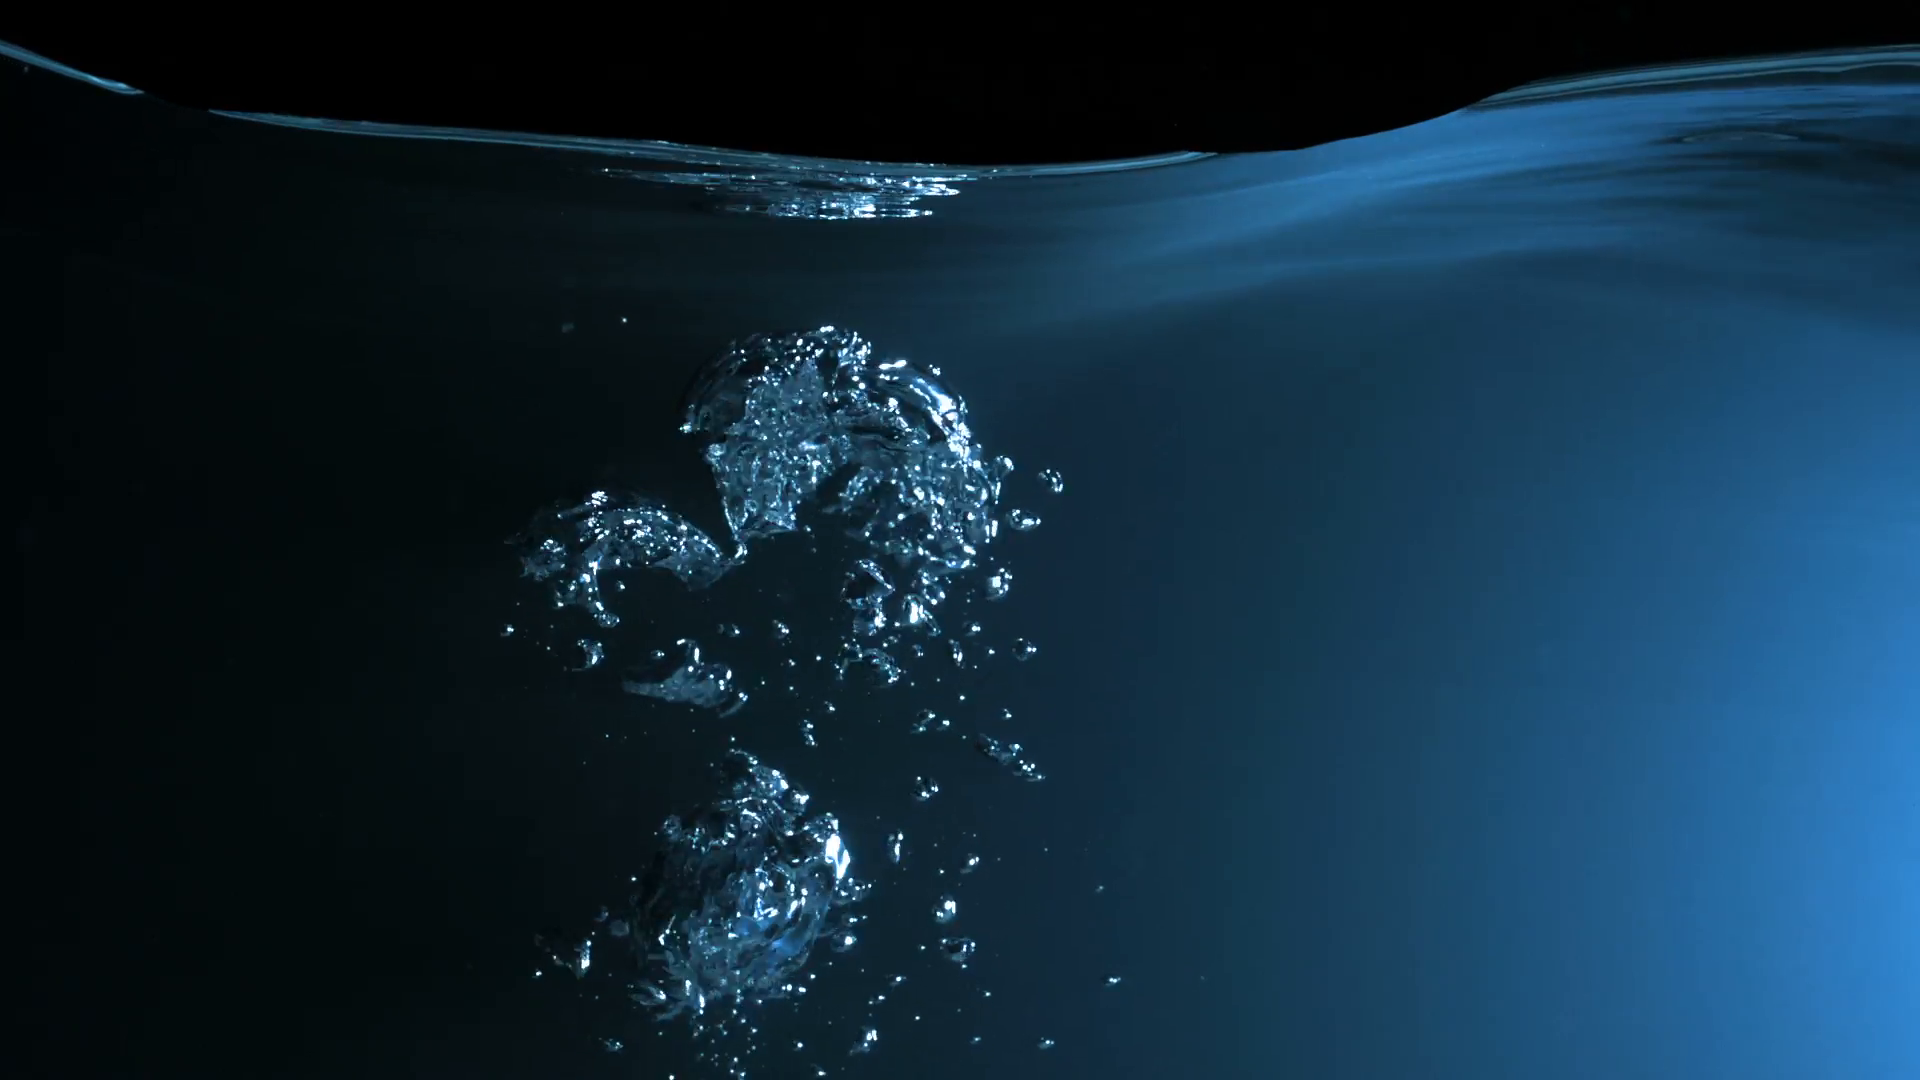 Bubbles rising in water, Slow Motion Stock Video Footage - Videoblocks